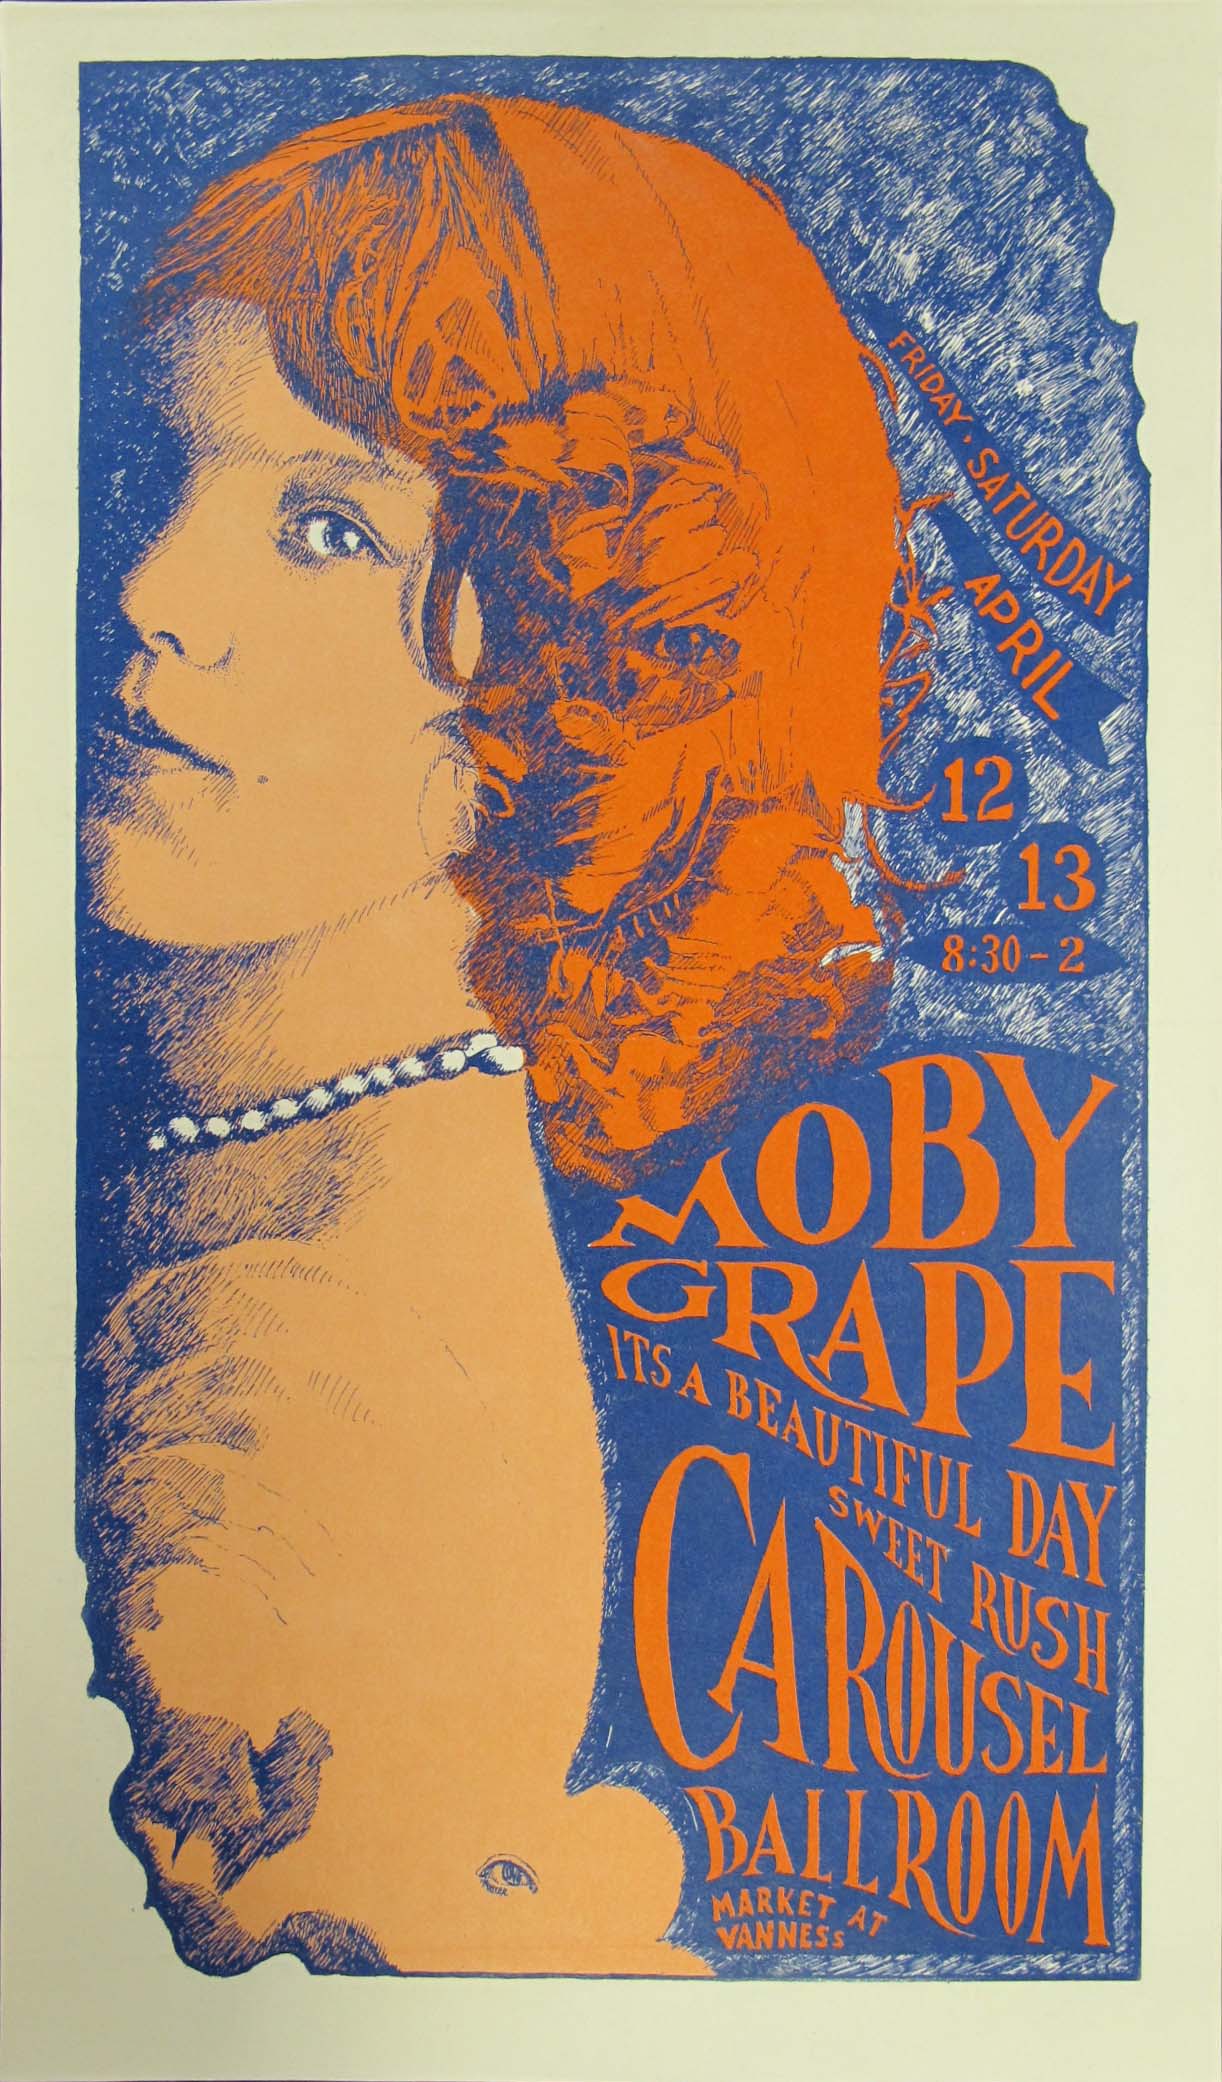 Moby Grape / It's A Beautiful Day Original Concert Poster